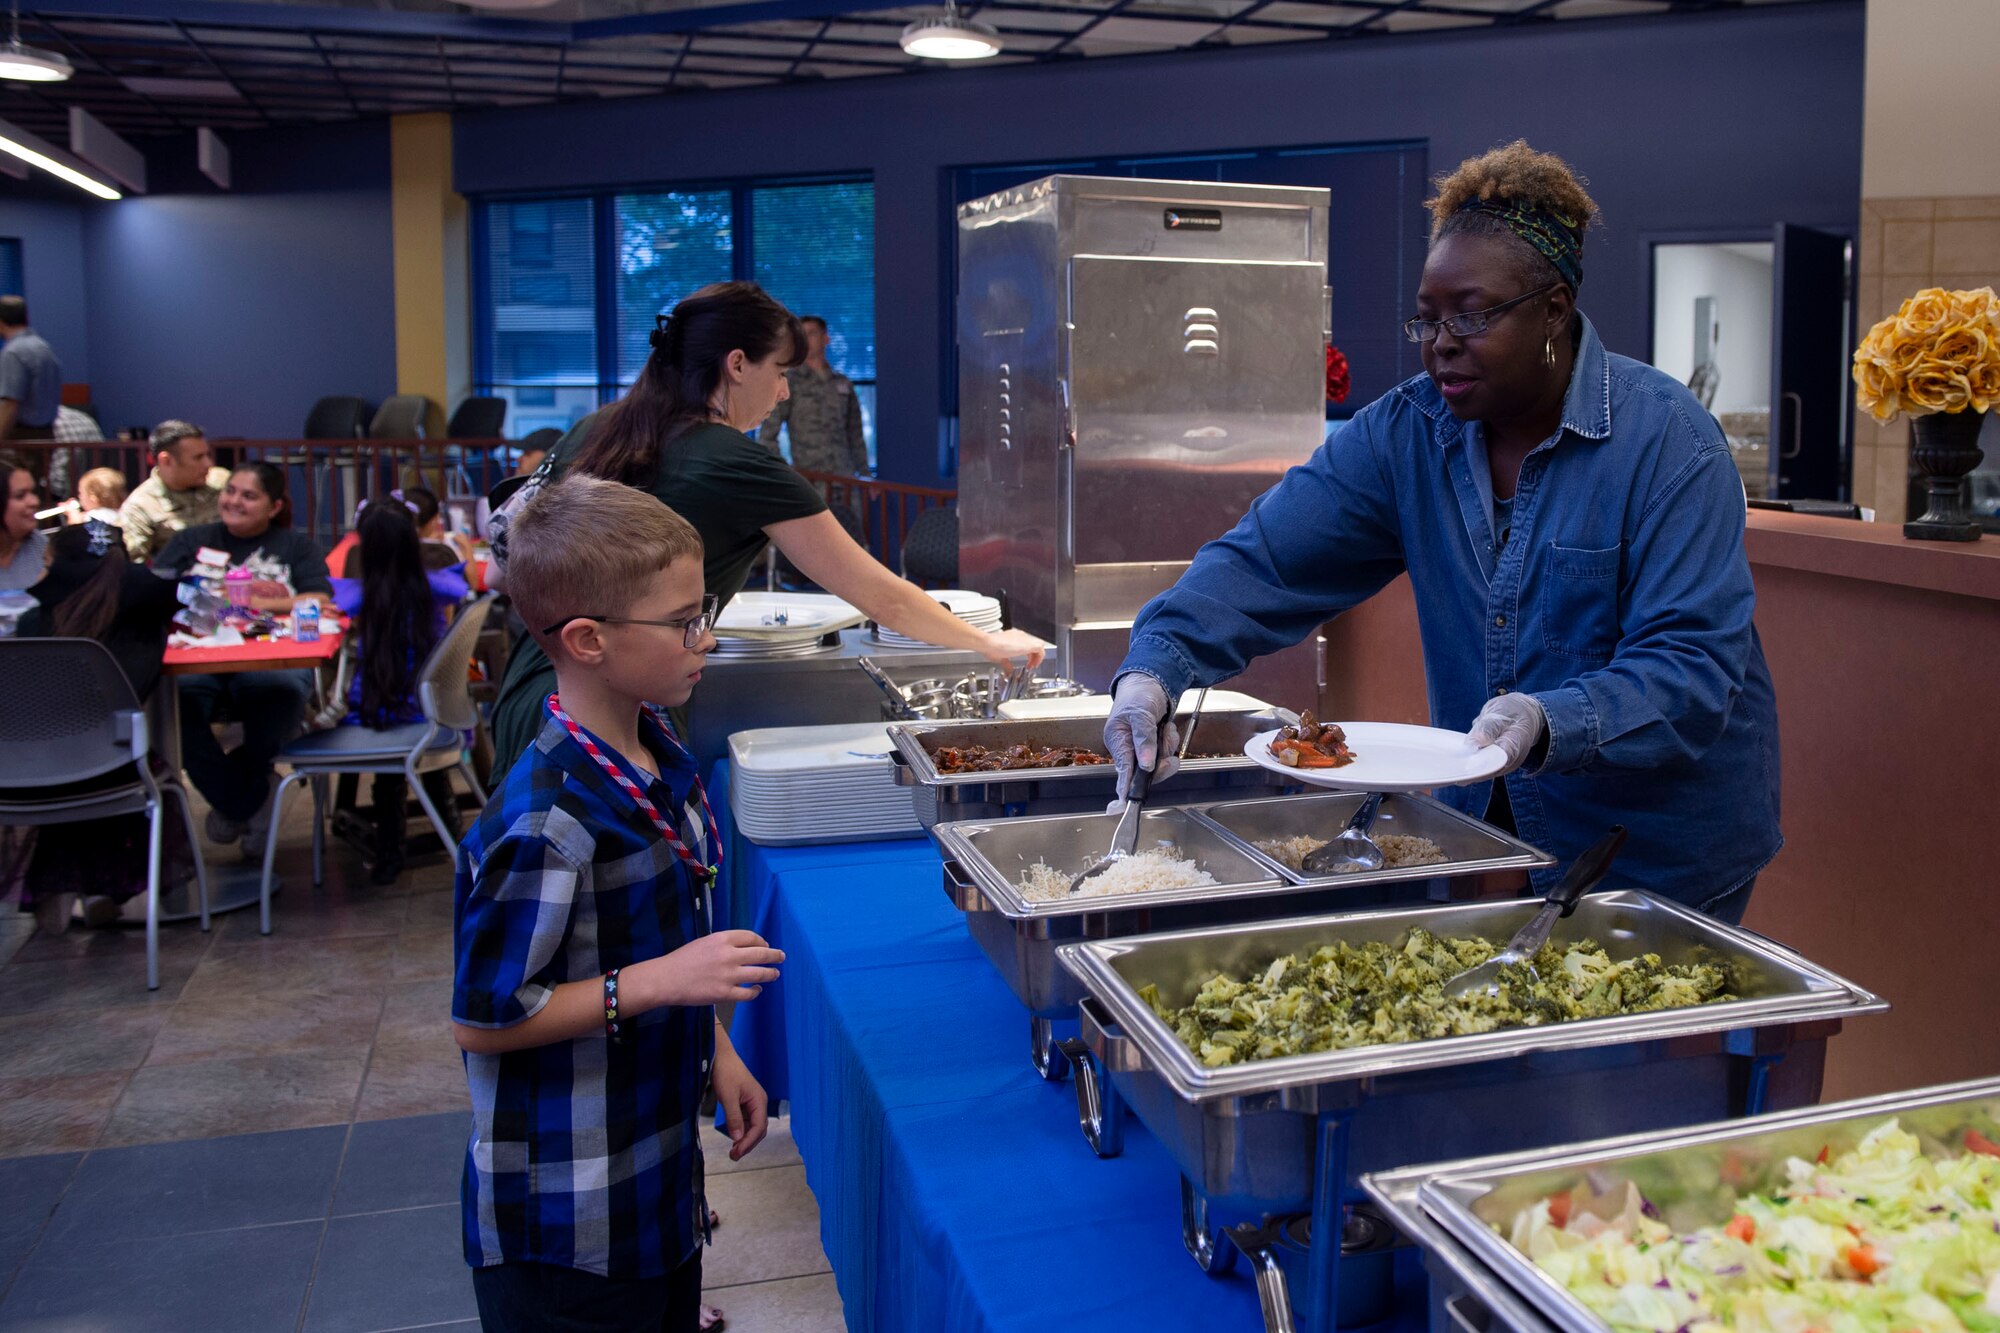 Sharon Register, 23d Force Support Squadron community readiness consultant, serves food during a Deployed Spouses Dinner Oct. 15, 2019, at Moody Air Force Base, Ga. The monthly event is a free dinner at Georgia Pines Dining Facility designed as a ‘thank you’ for each family’s support and sacrifice. The dinner, occurring on every third Tuesday of the month, provides an opportunity for spouses to interact with other families of deployed Airmen, key spouses and unit leadership as well as provide a break for the spouse while their military sponsor is deployed. The next Deployed Spouses Dinner will be Nov. 19. (U.S. Air Force photo by Airman Azaria E. Foster)